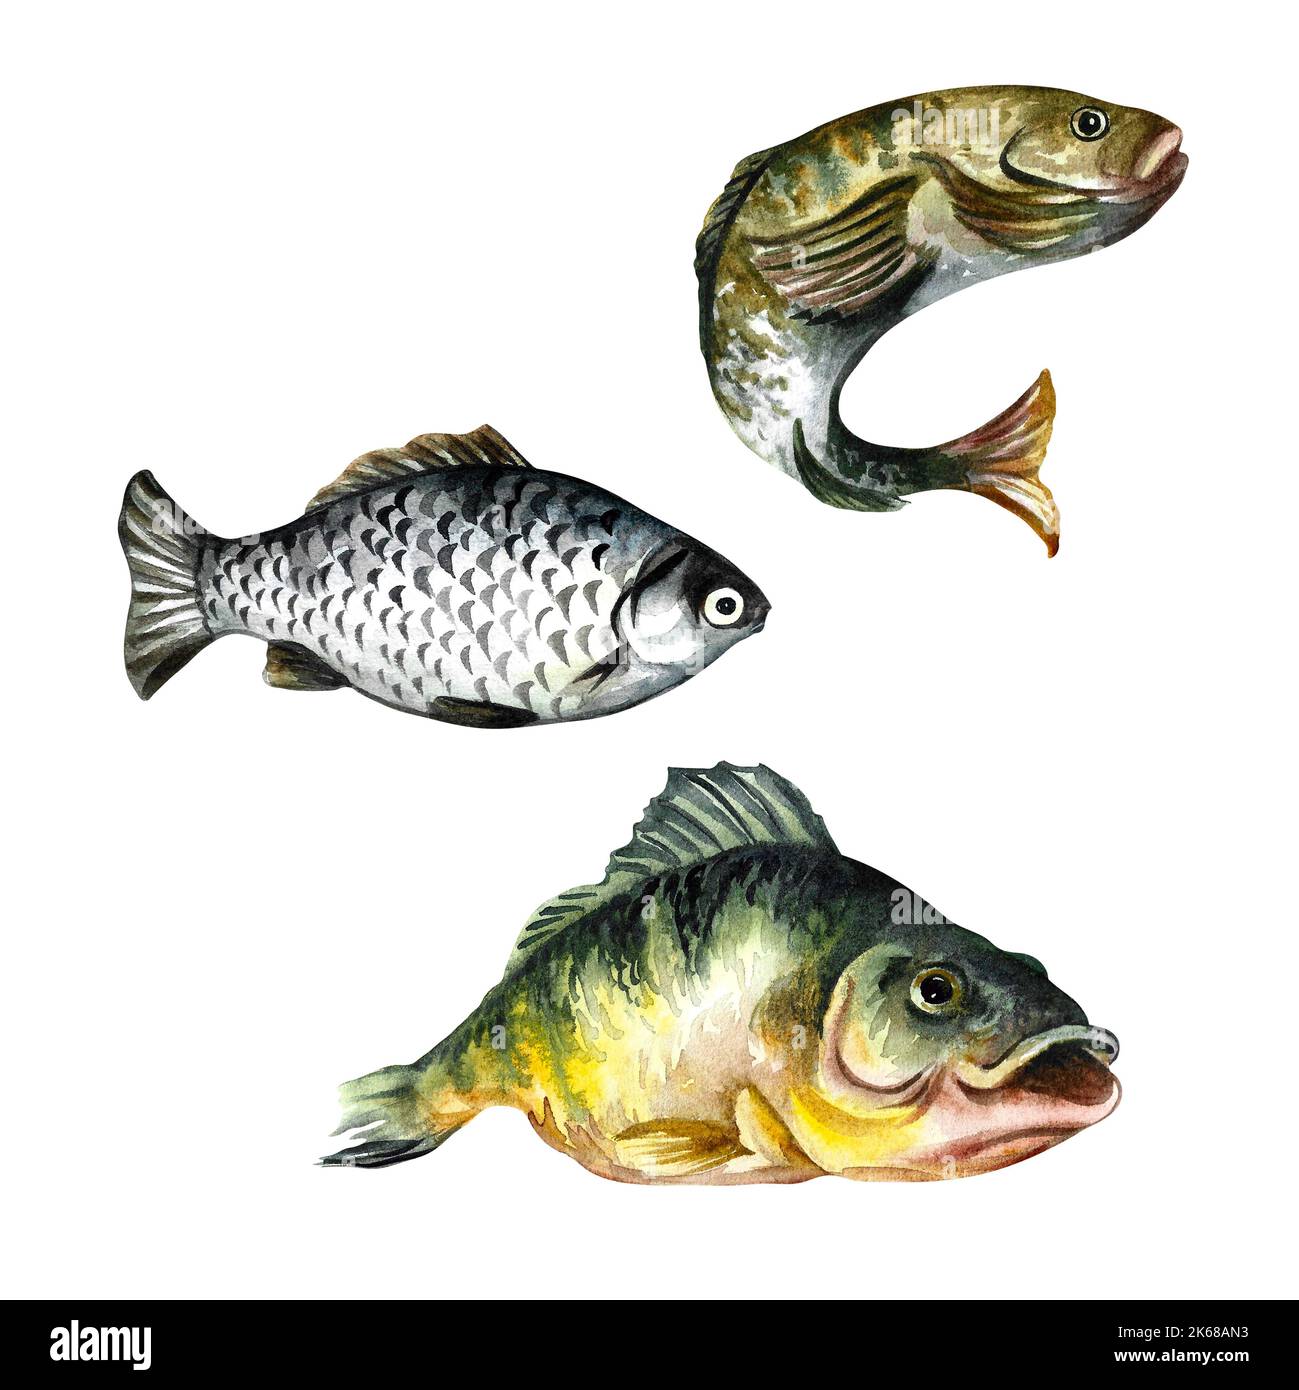 Set of fish, isolate on a white background. Watercolor illustration. For fishing. For design, packaging, window display stickers, banners, etc. Stock Photo